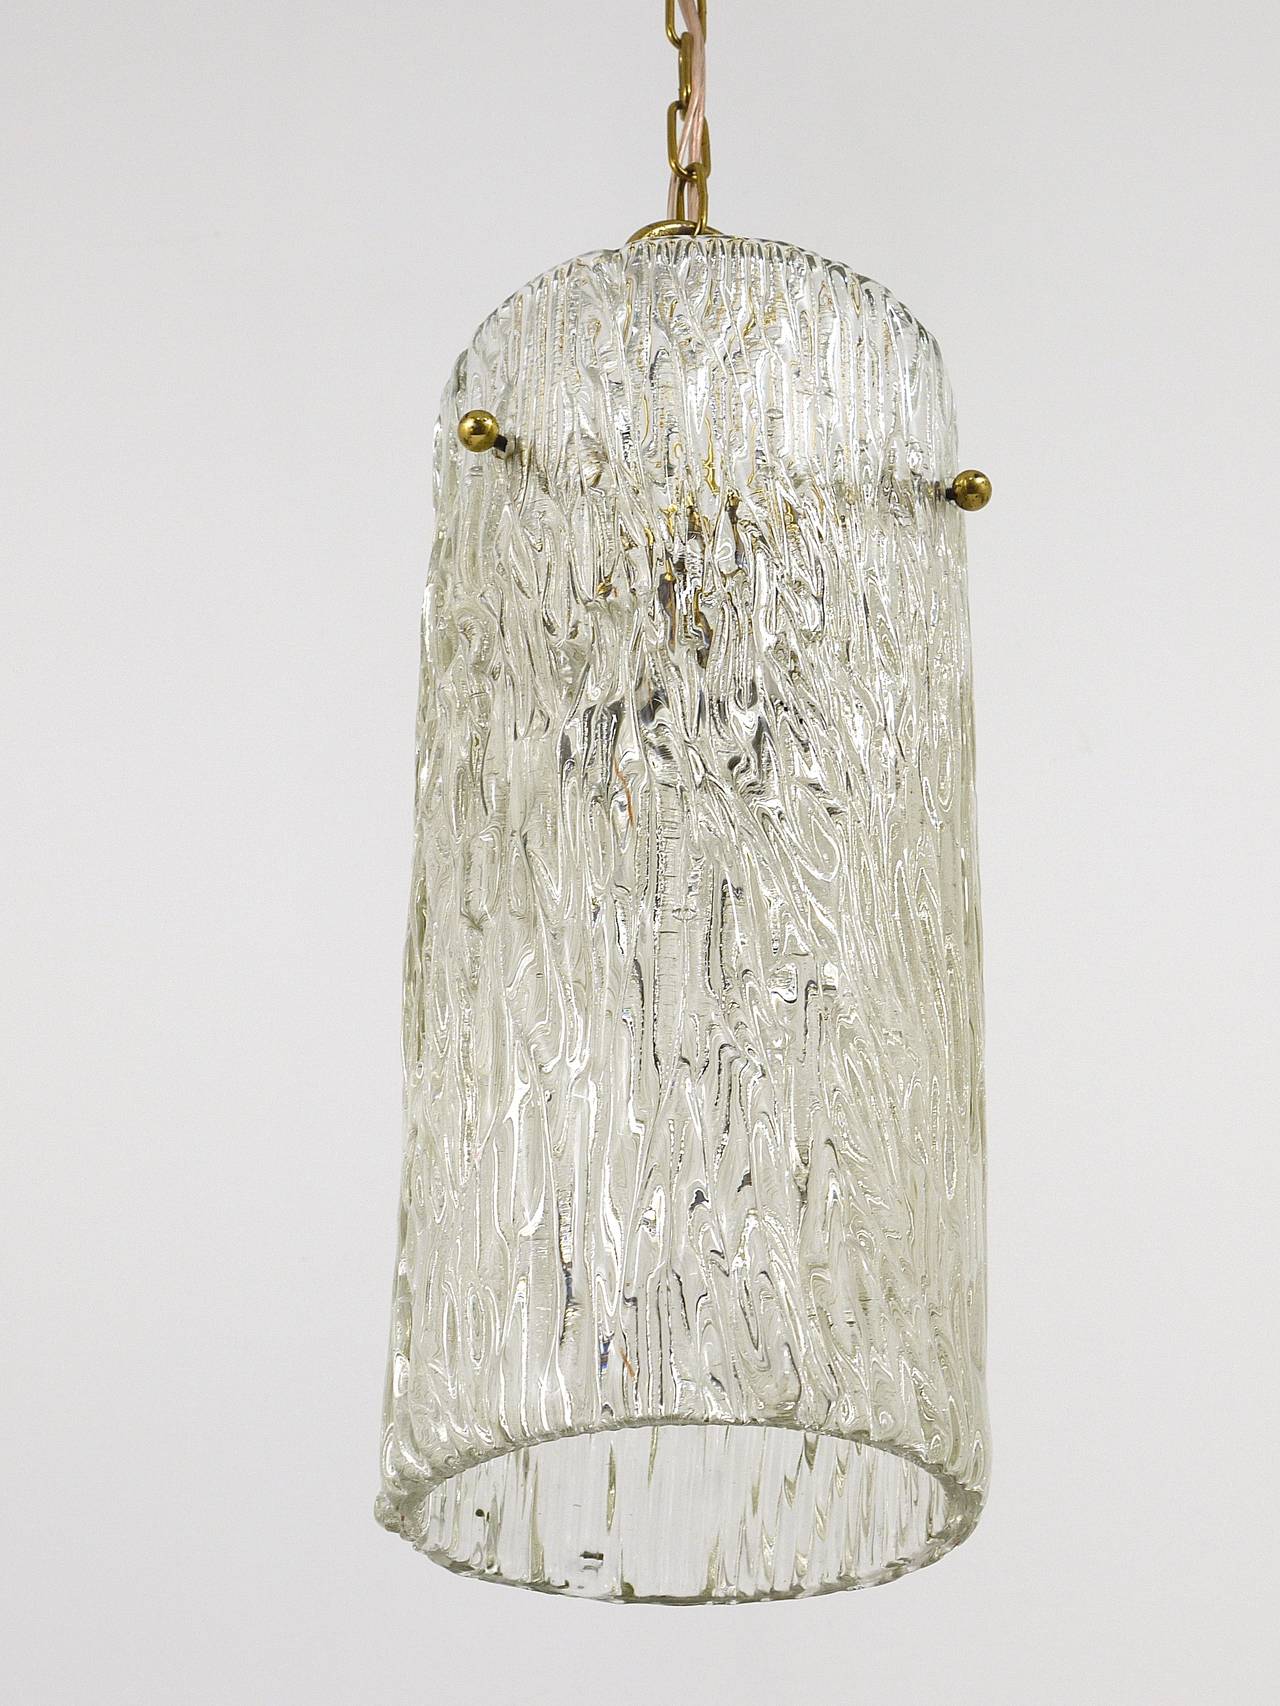 Up to two beautiful matching pendant lamps from the 1950s, designed an executed by J.T. Kalmar in Austria. Sold and priced per piece. Brass hardware with a big tube made of clear textured melting glass. In good condition with nice patina on the